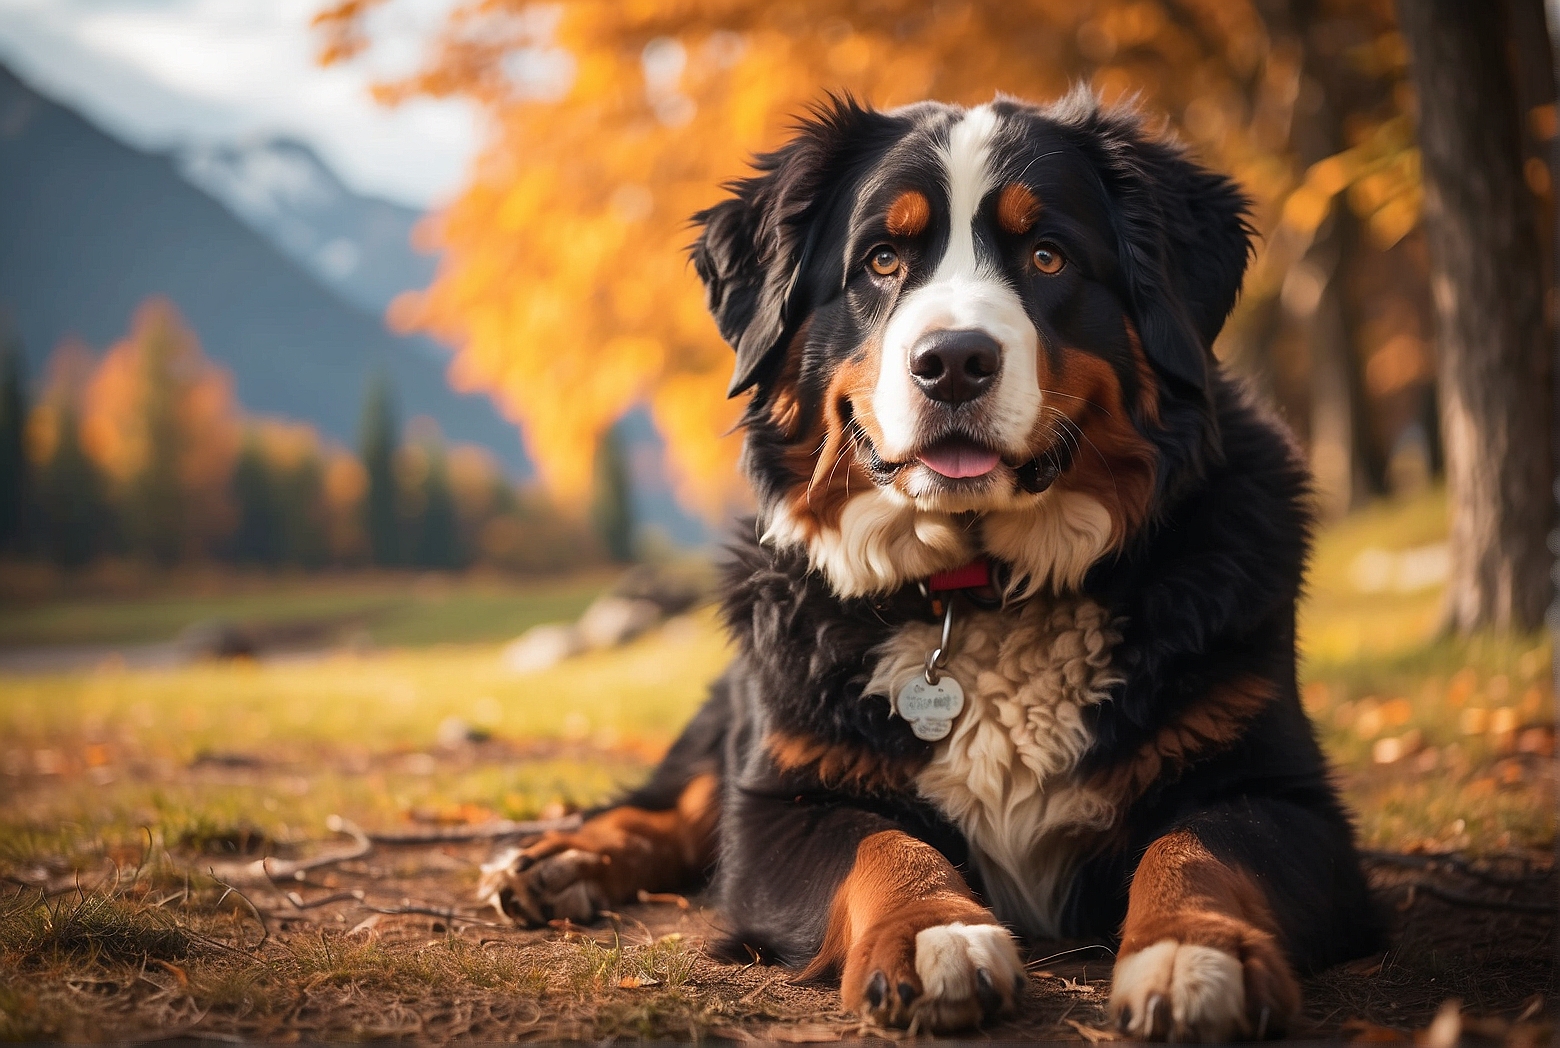 Can a Bernese Mountain Dog Turn on Its Owner?